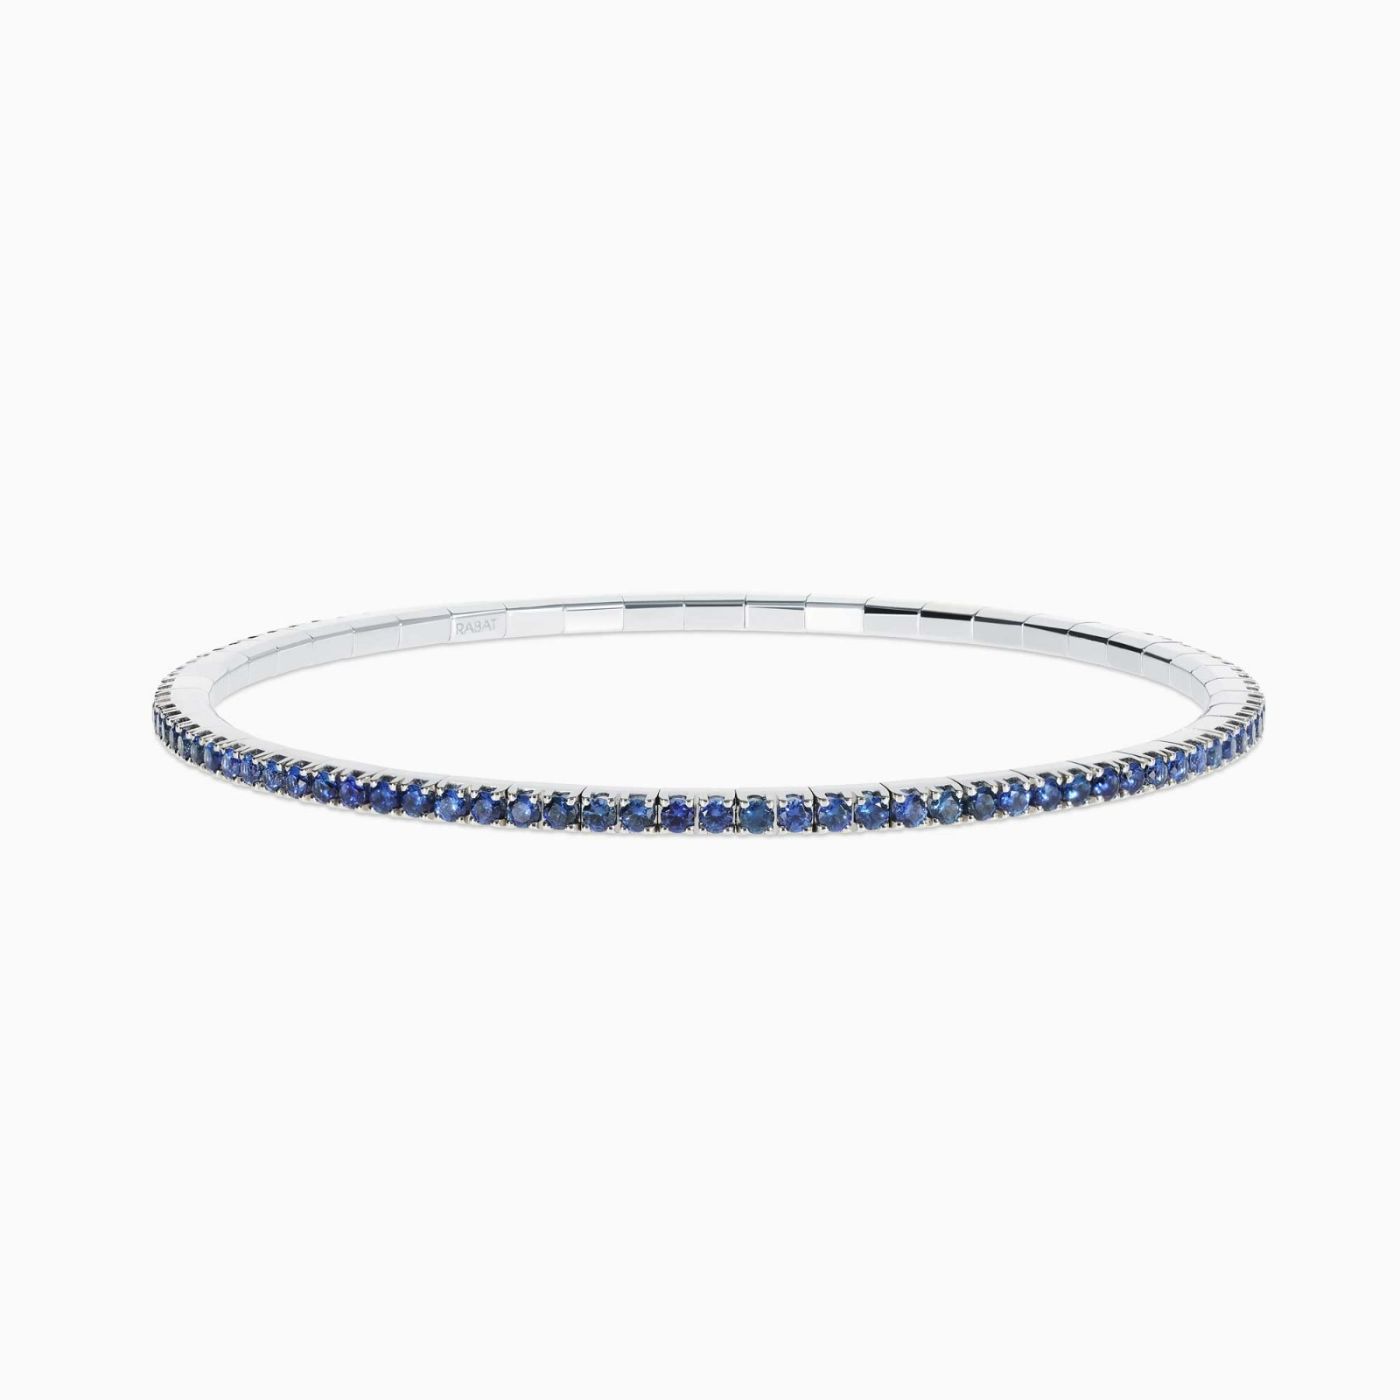 White gold riviere bracelet with brilliant-cut sapphires